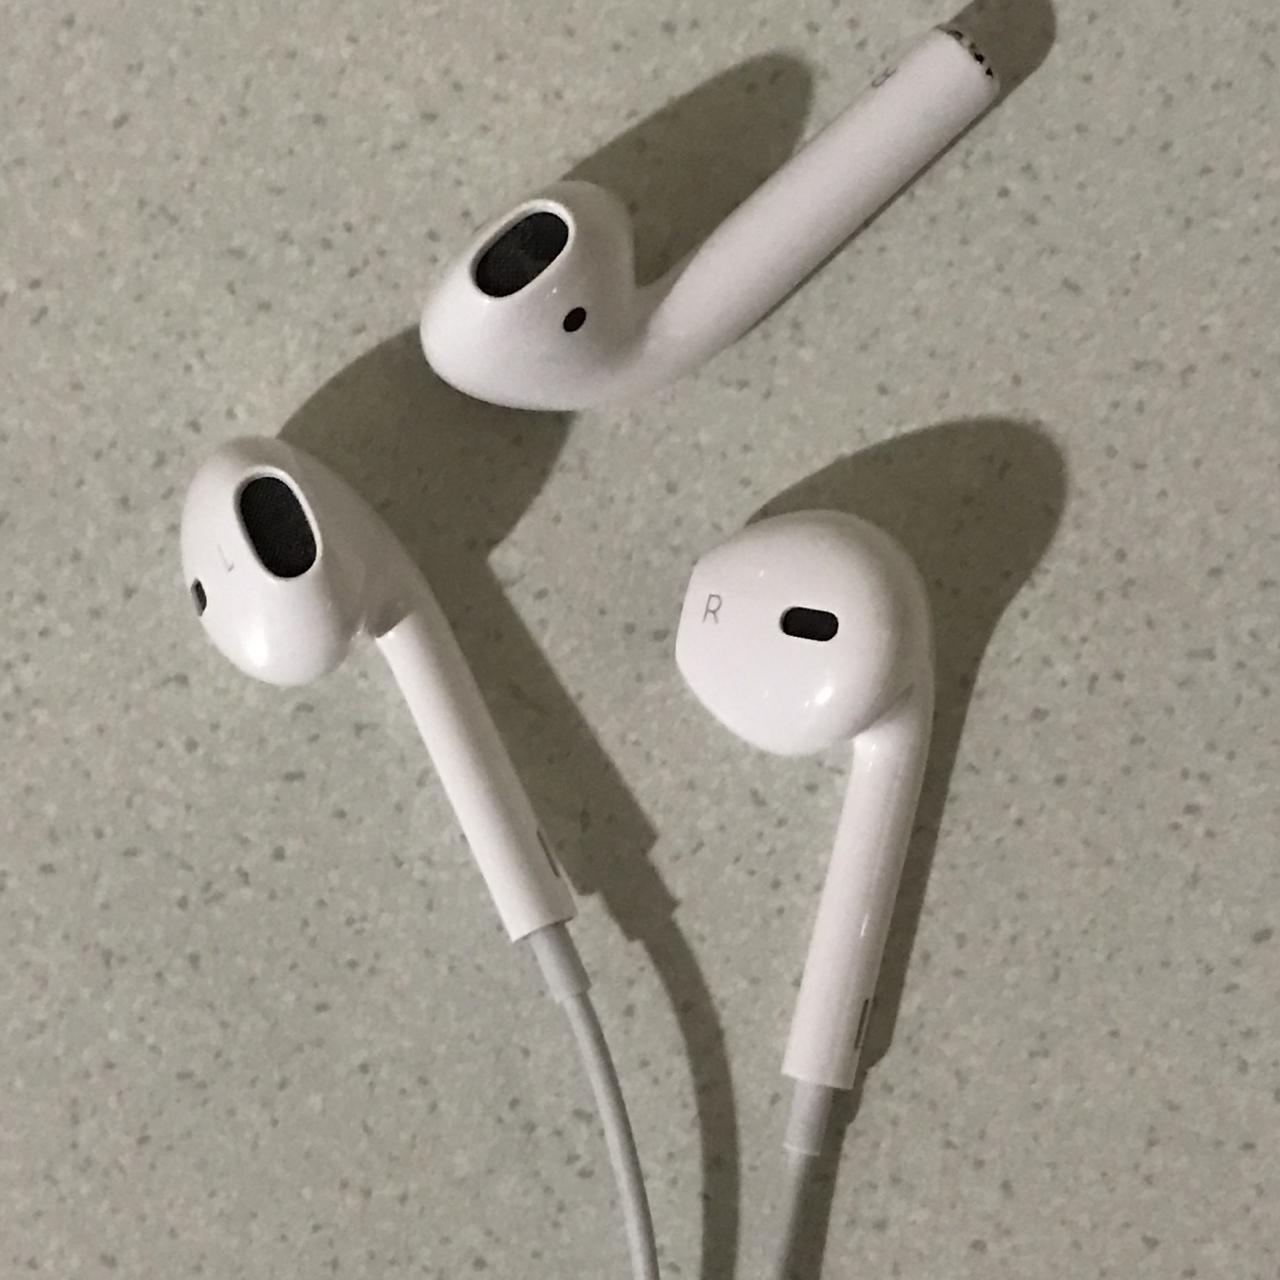 AirPods and Airbuds